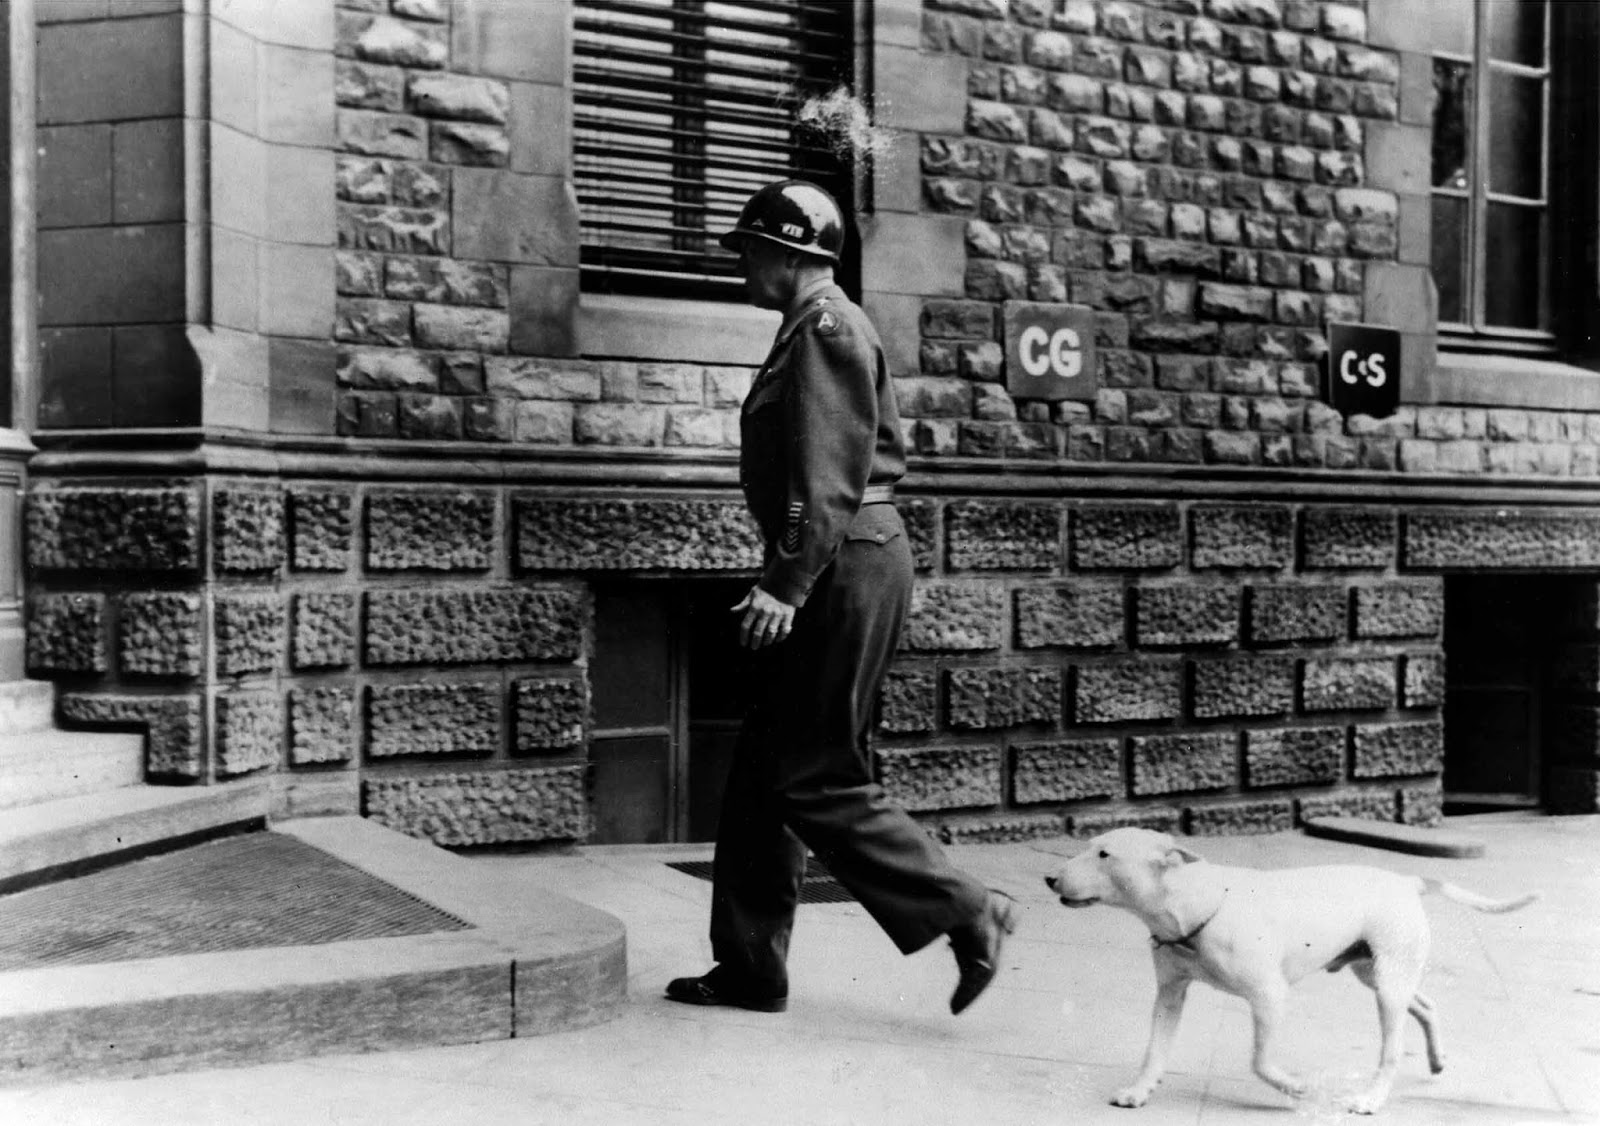 Willie following Patton as he enters his Headquarters at Luxembourg.